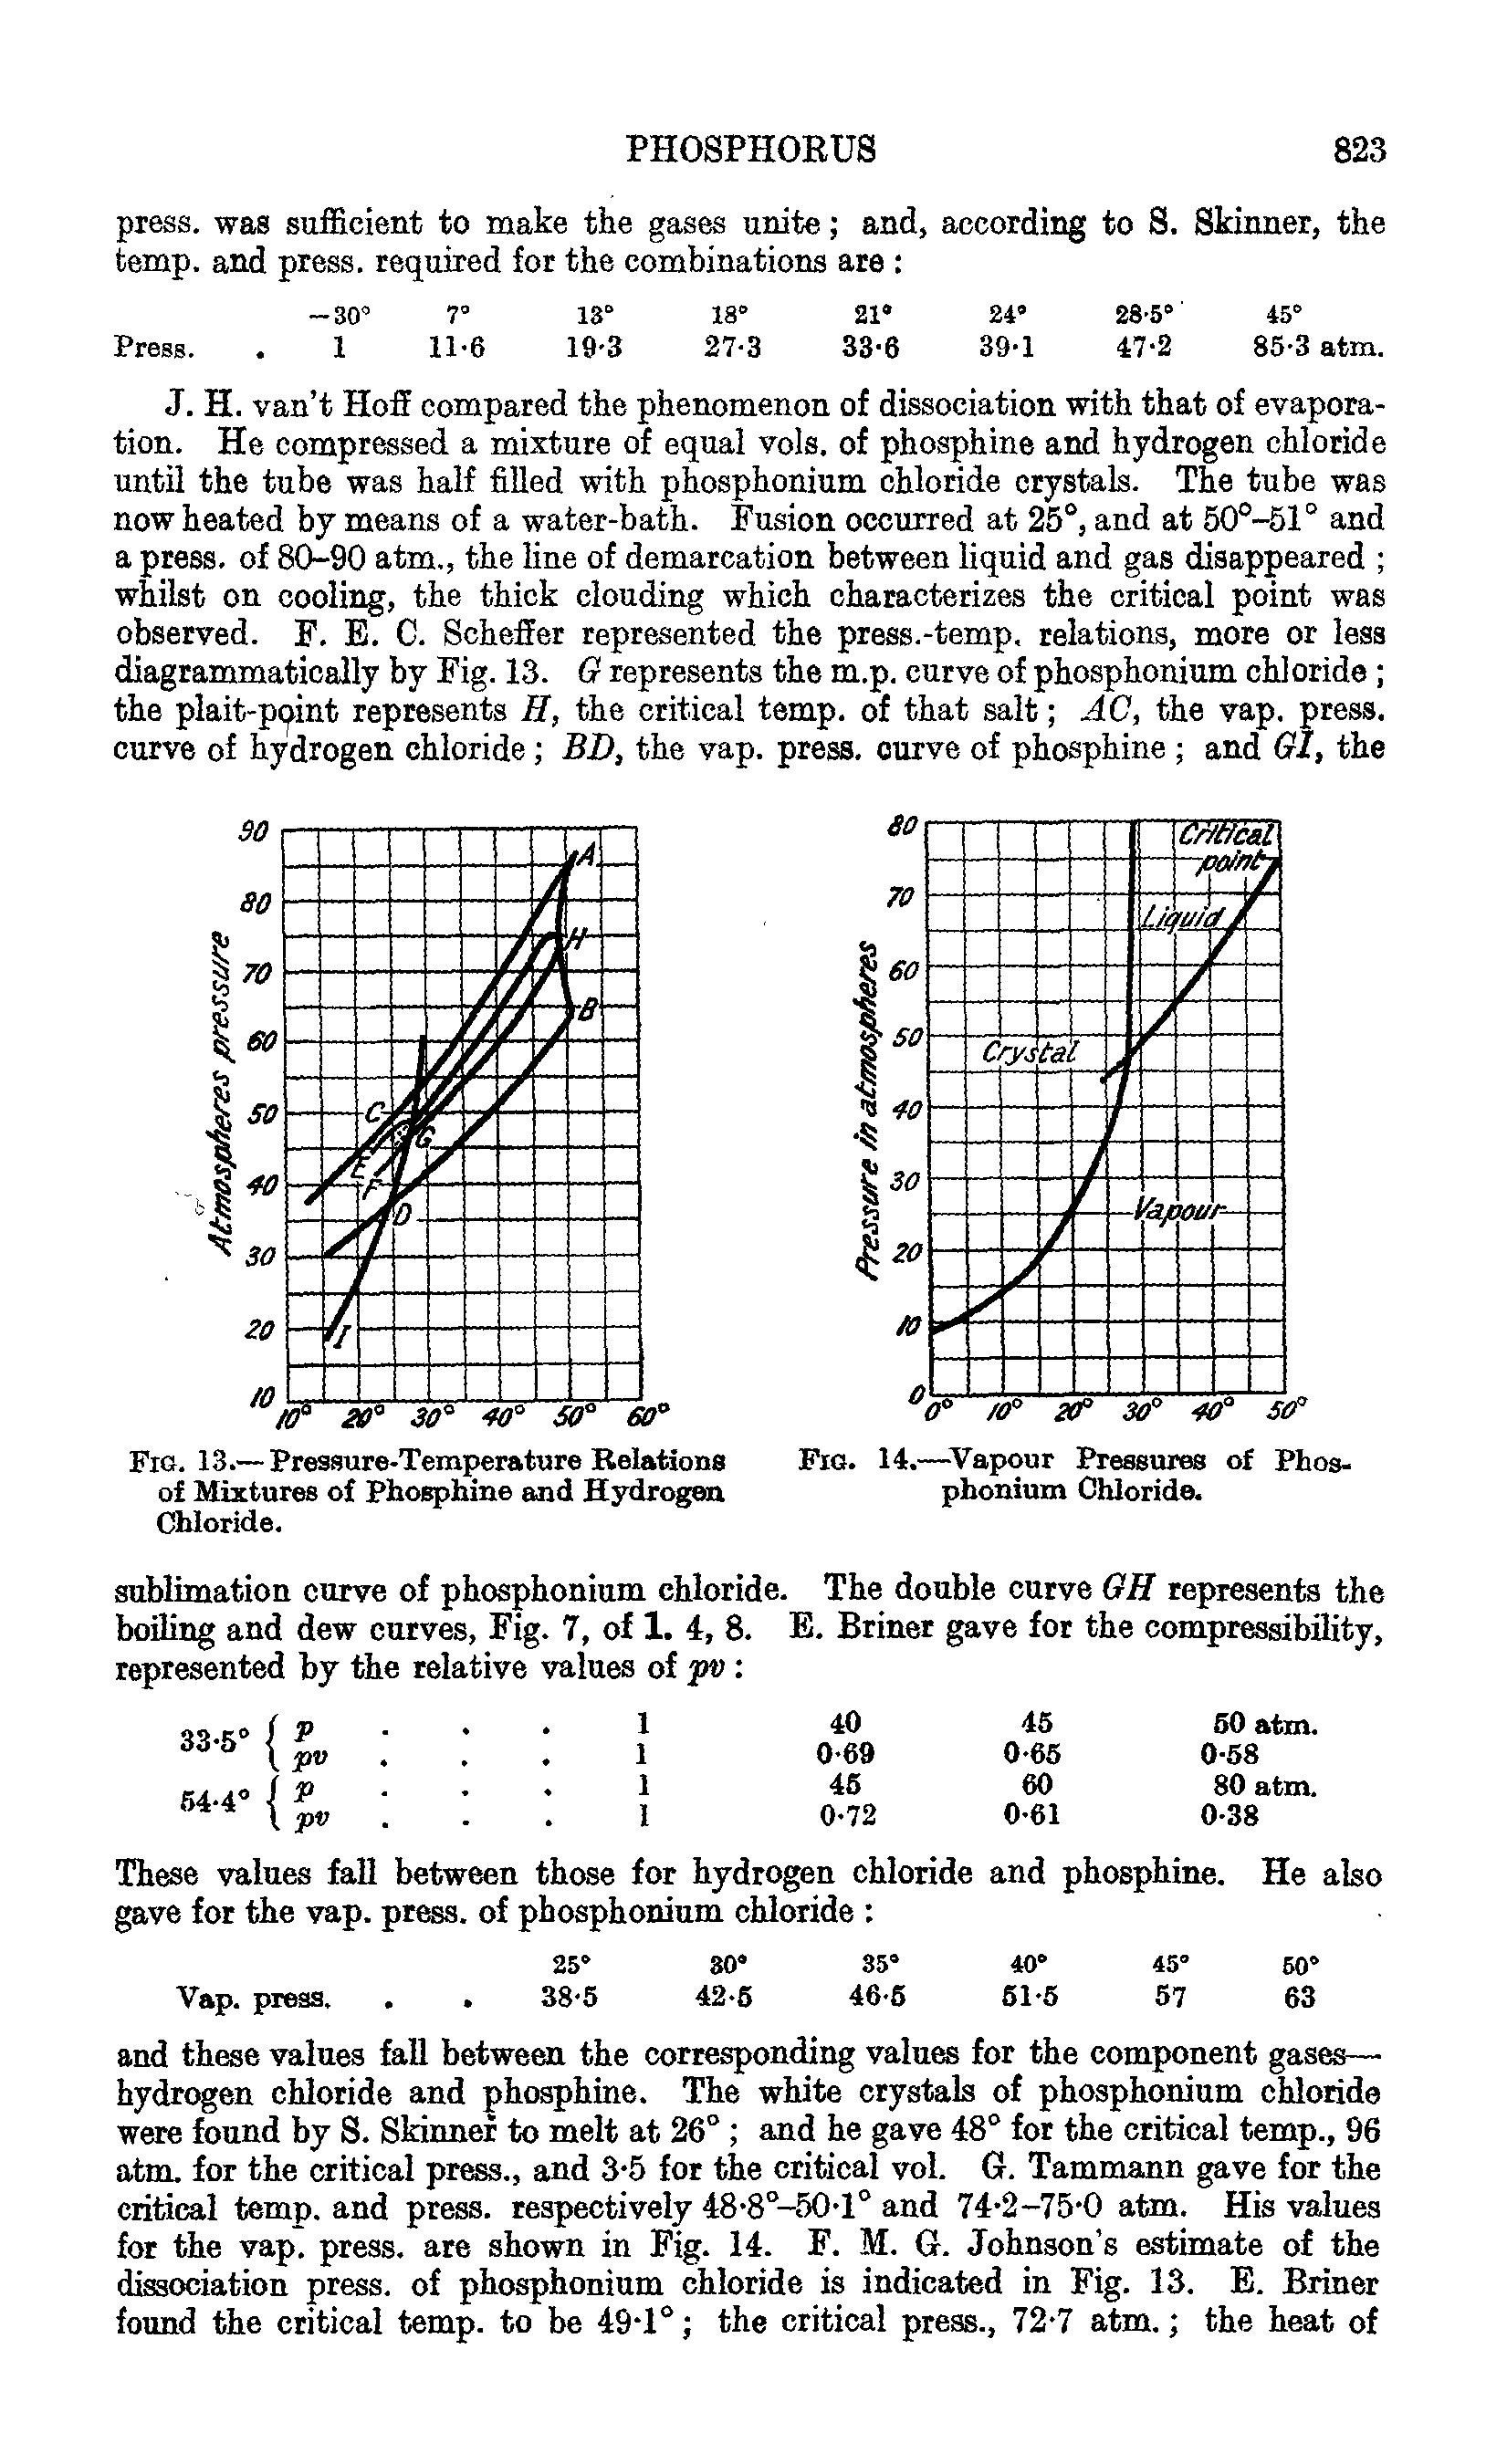 Fig. 13.— Pressure-Temperature Relations Fig. 14.—-Vapour Pressures of Phos-of Mixtures of Phosphine and Hydrogen phonium Chloride.